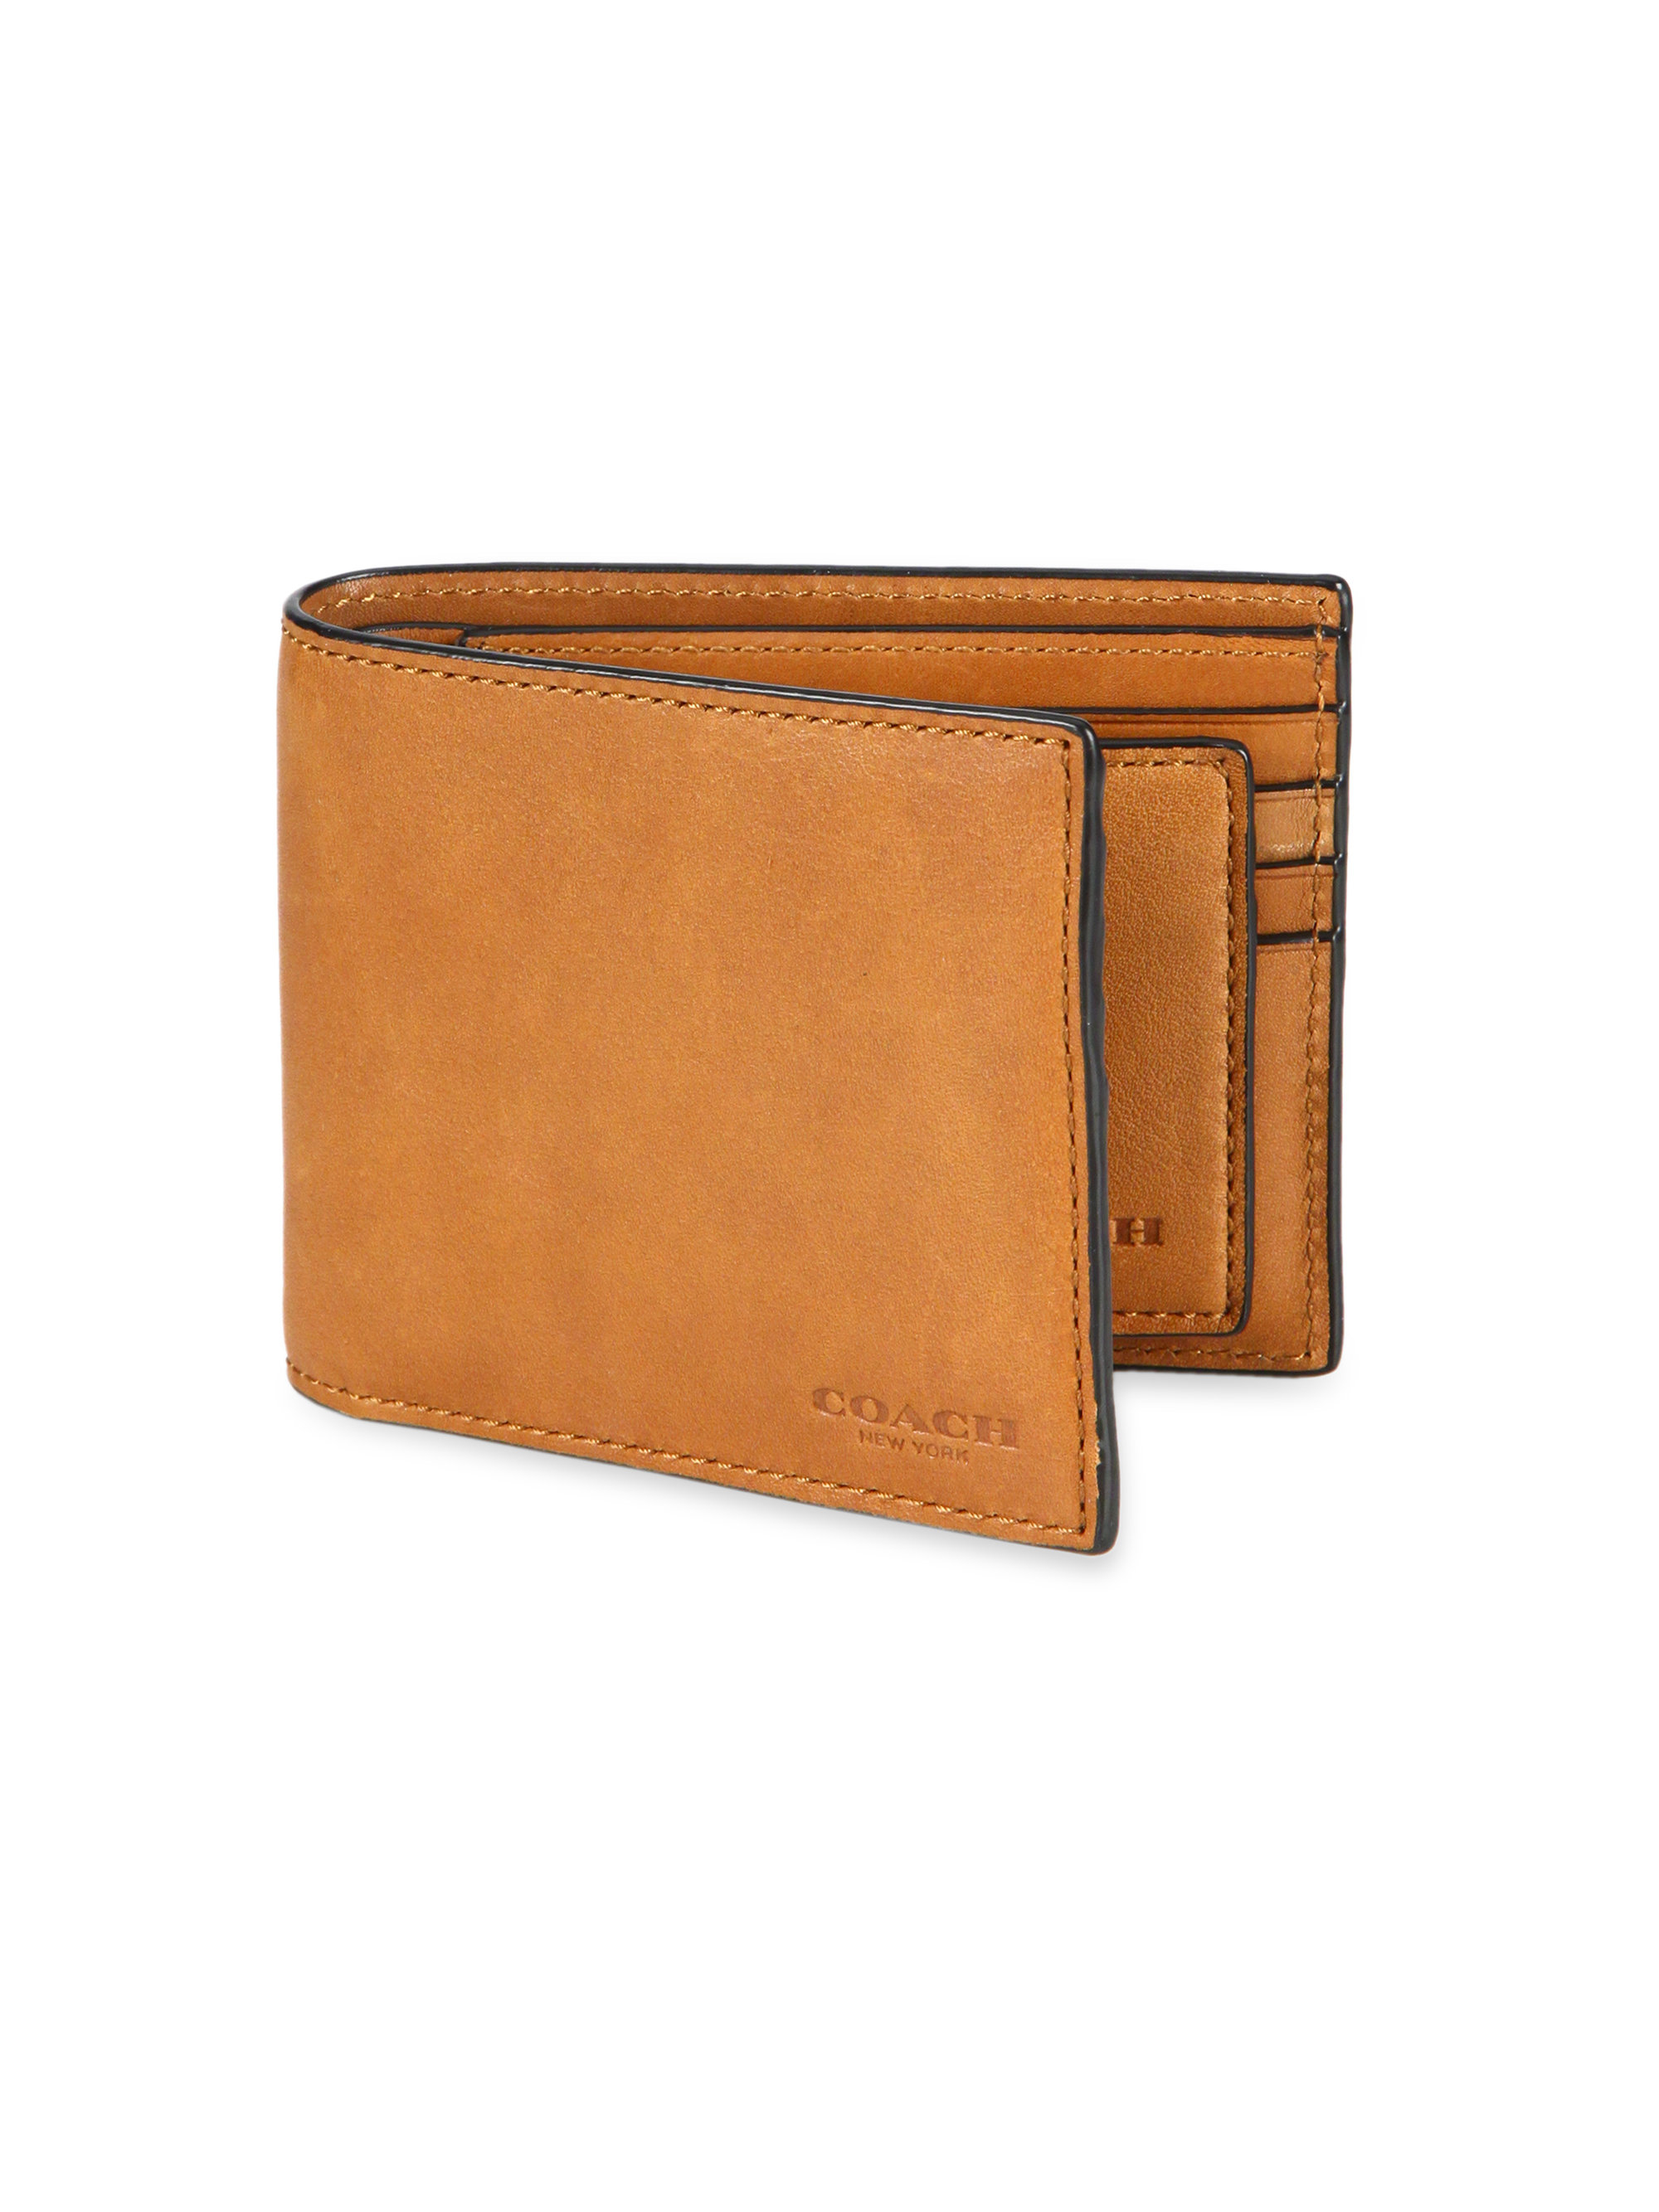 Coach Leather  Wallet  in Brown  for Men  Lyst